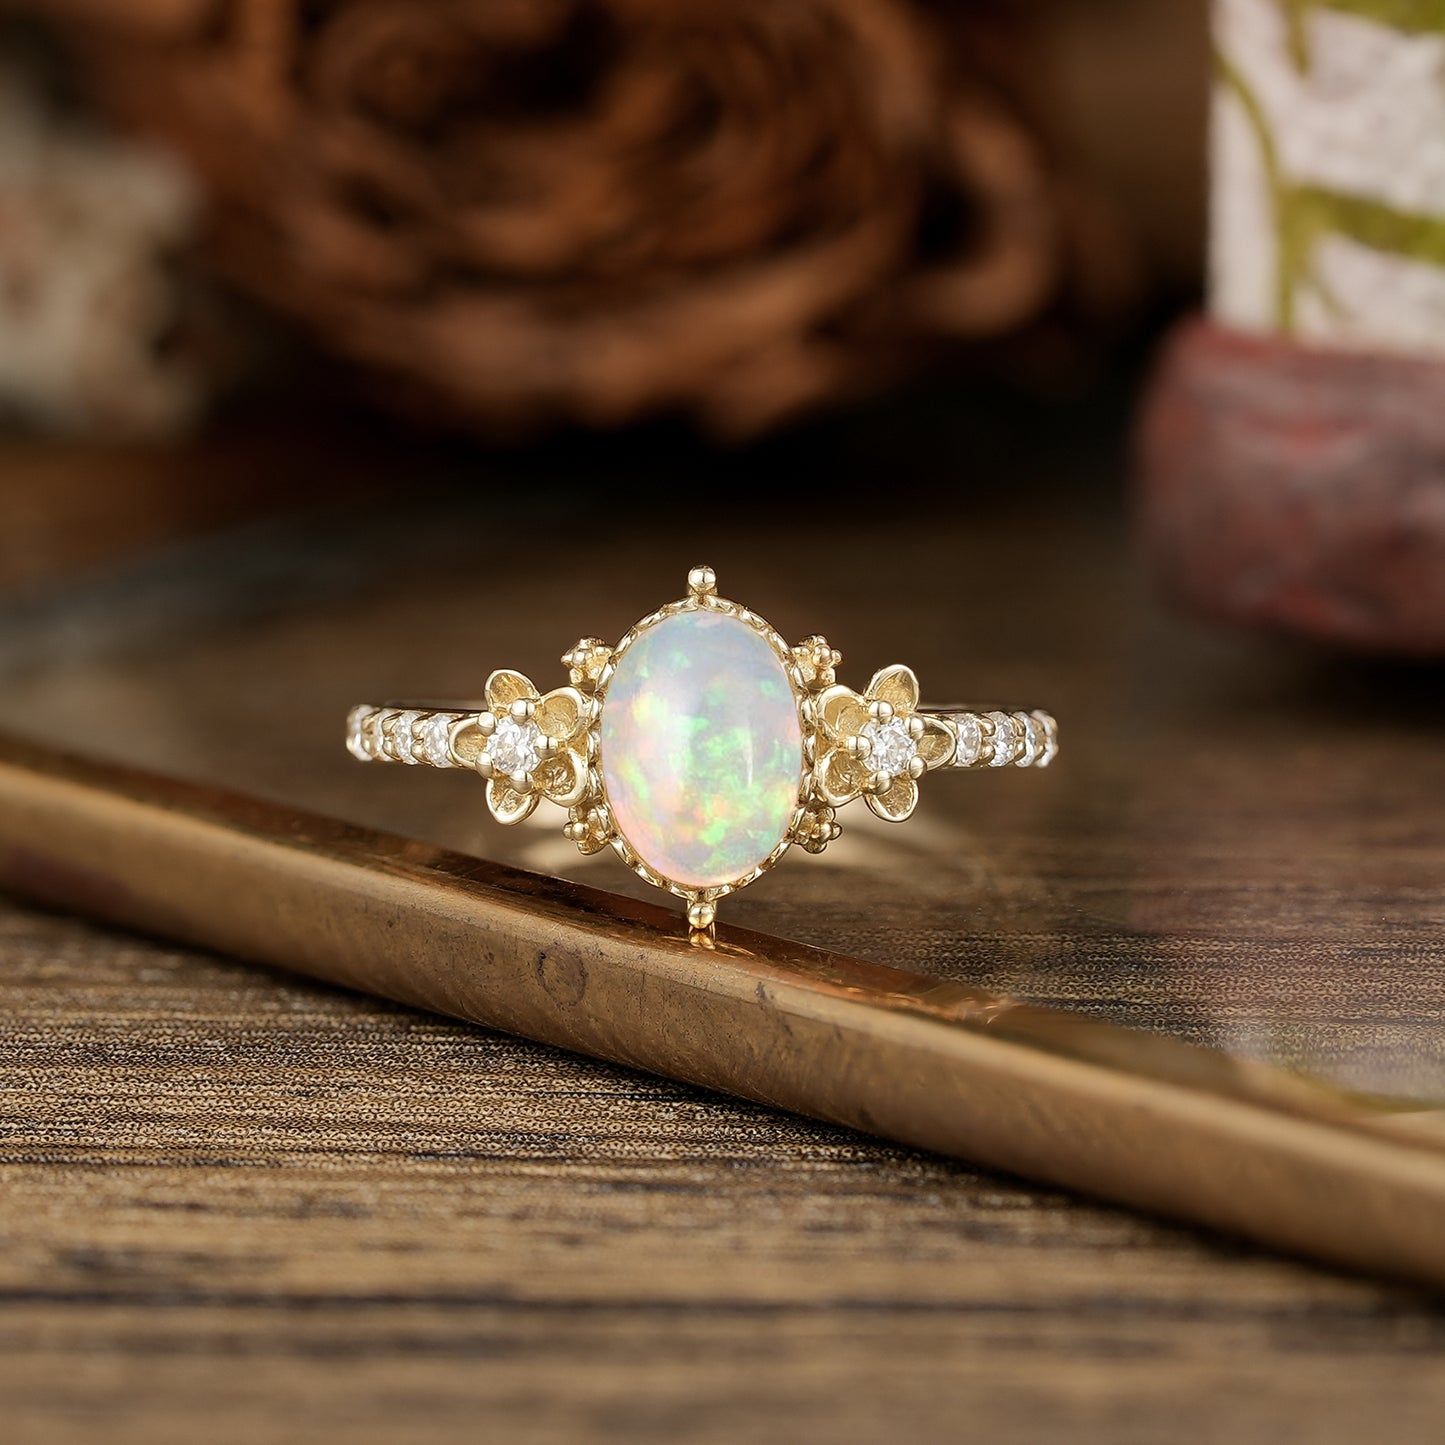 Hera's Opal Garden: A Floral and Leafy Ring